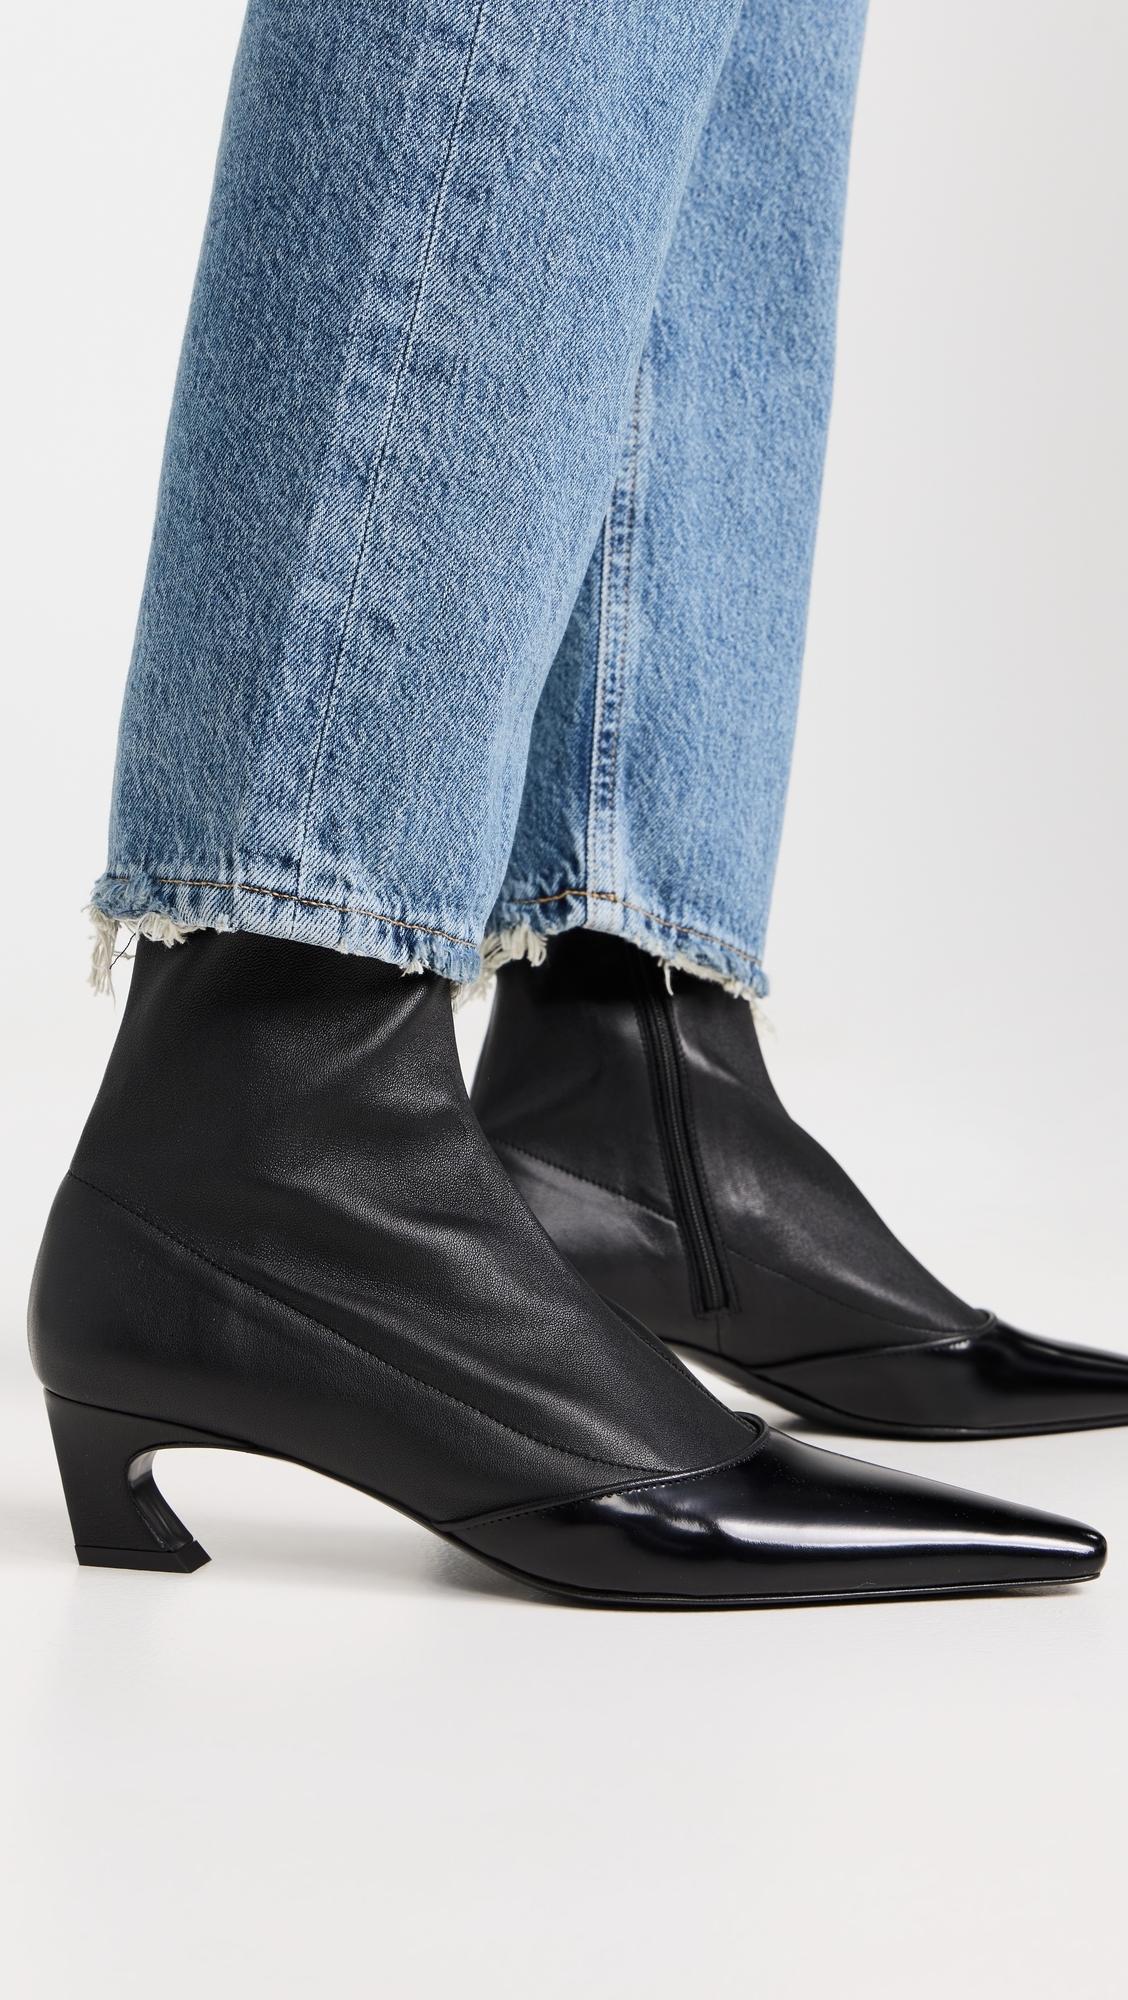 Acne Studios Bano Boots Brush-off in Black | Lyst